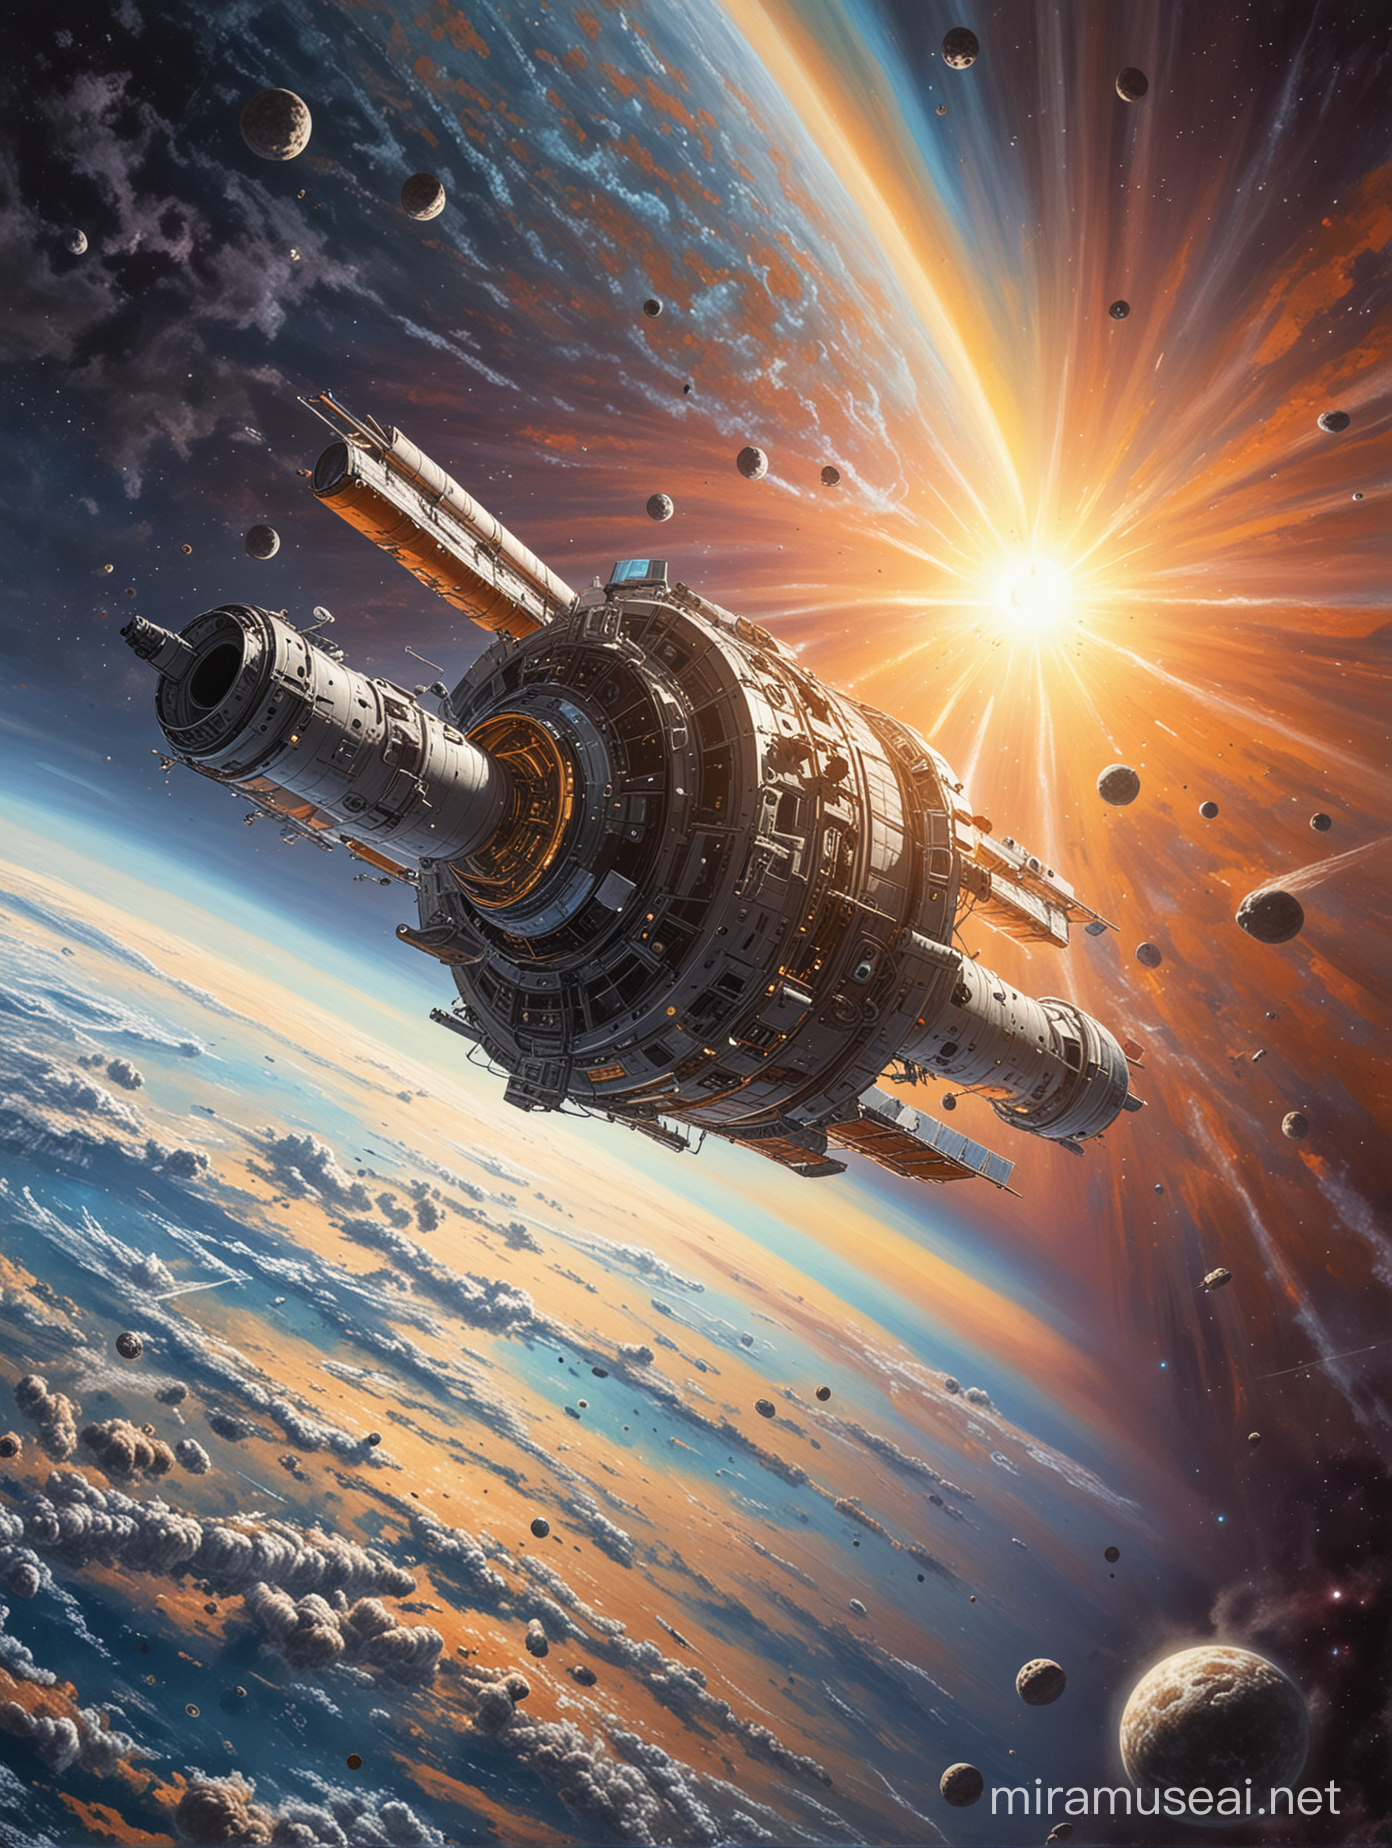 Highly detailed painting, wide view fron one side, an enormous space station having the shape of a rubber ring is floating above the Earth, in the background the Sun is rising from behind the Earth, a supply rocket approaches the space station from below, the space station is smoothly metallic with rings of portholes and alien symbols marked on it, use muted pastel colors only, high quality